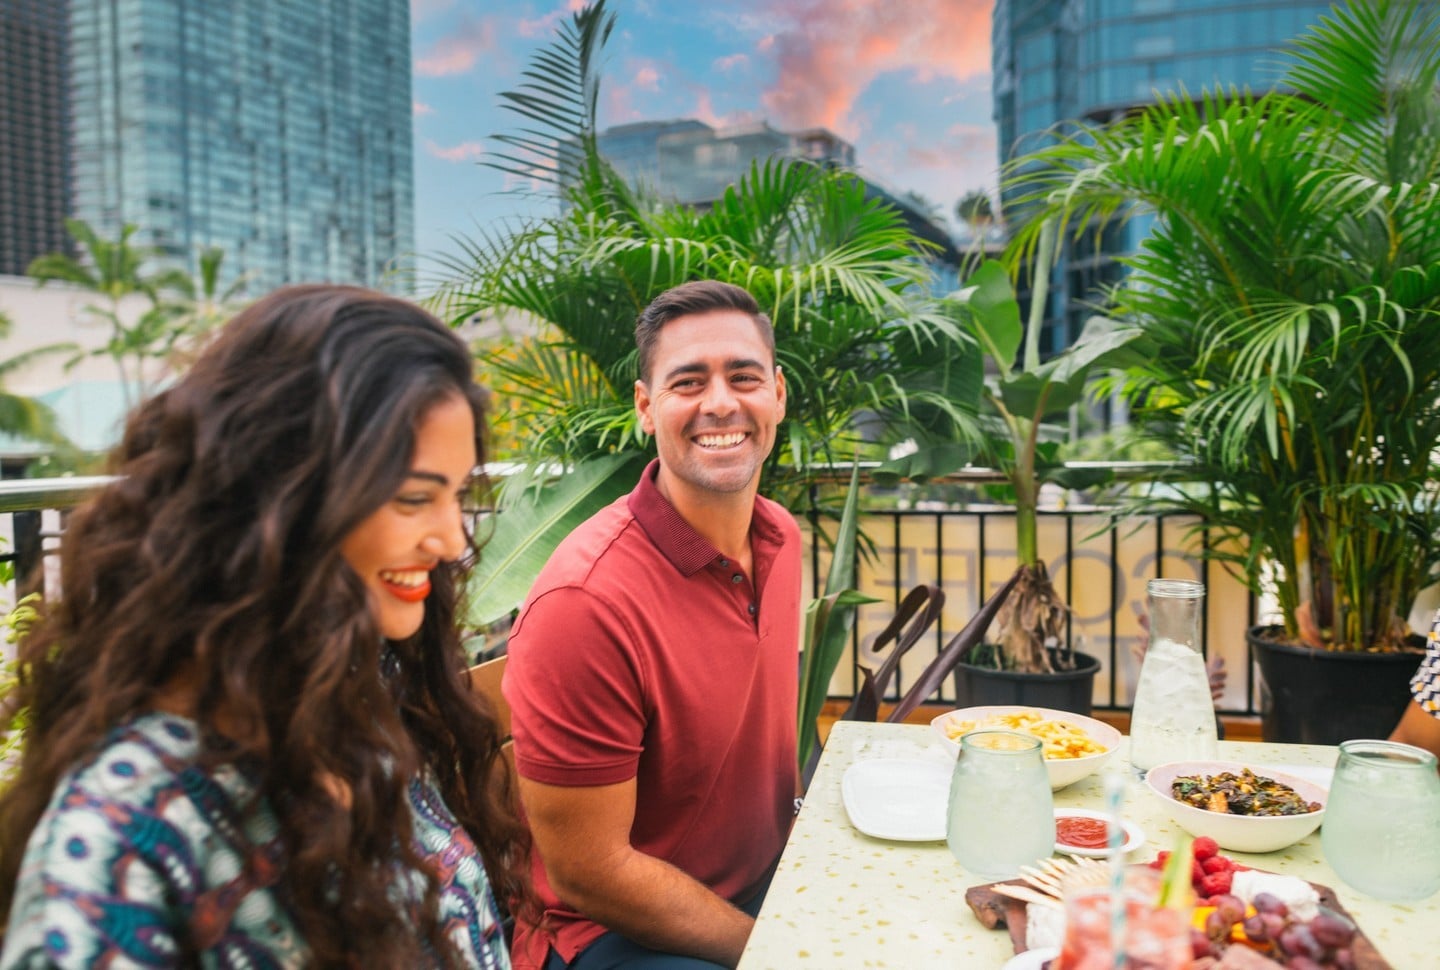 Enjoy the island's beautiful weather with a meal alfresco. At Ward Village, there are a variety of globally inspired eateries offering breakfast, brunch, lunch and dinner!